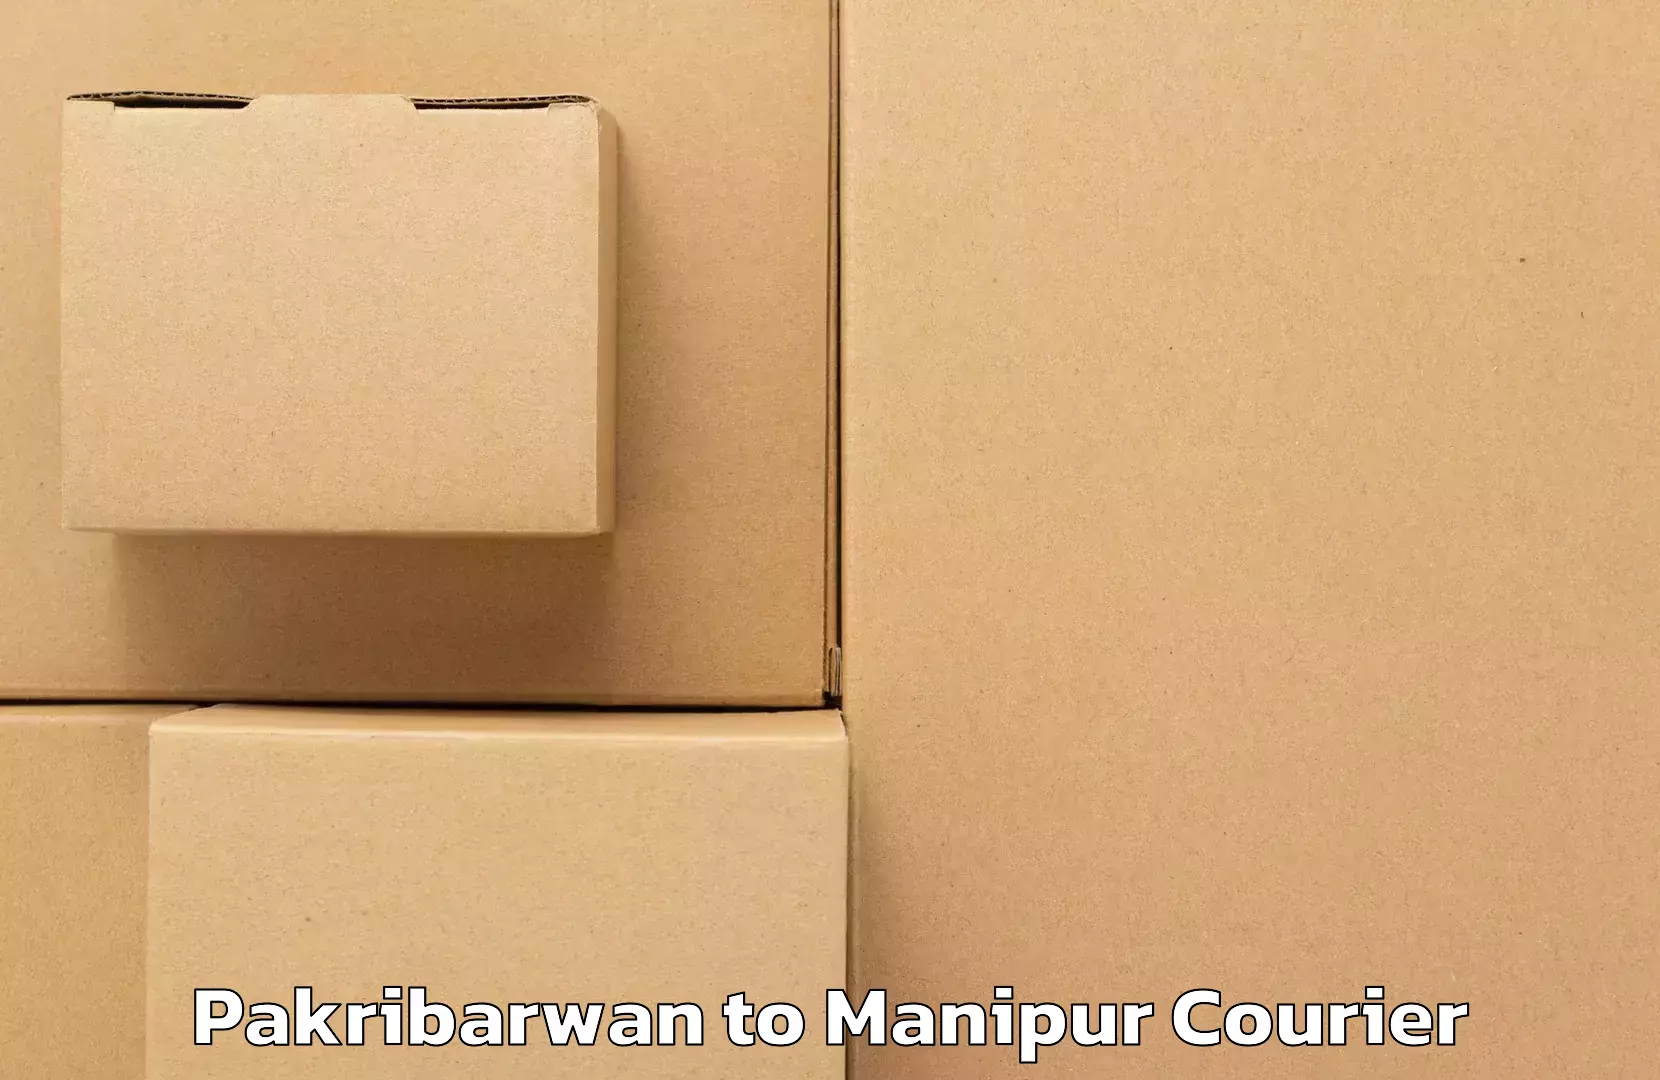 On-call courier service Pakribarwan to Manipur